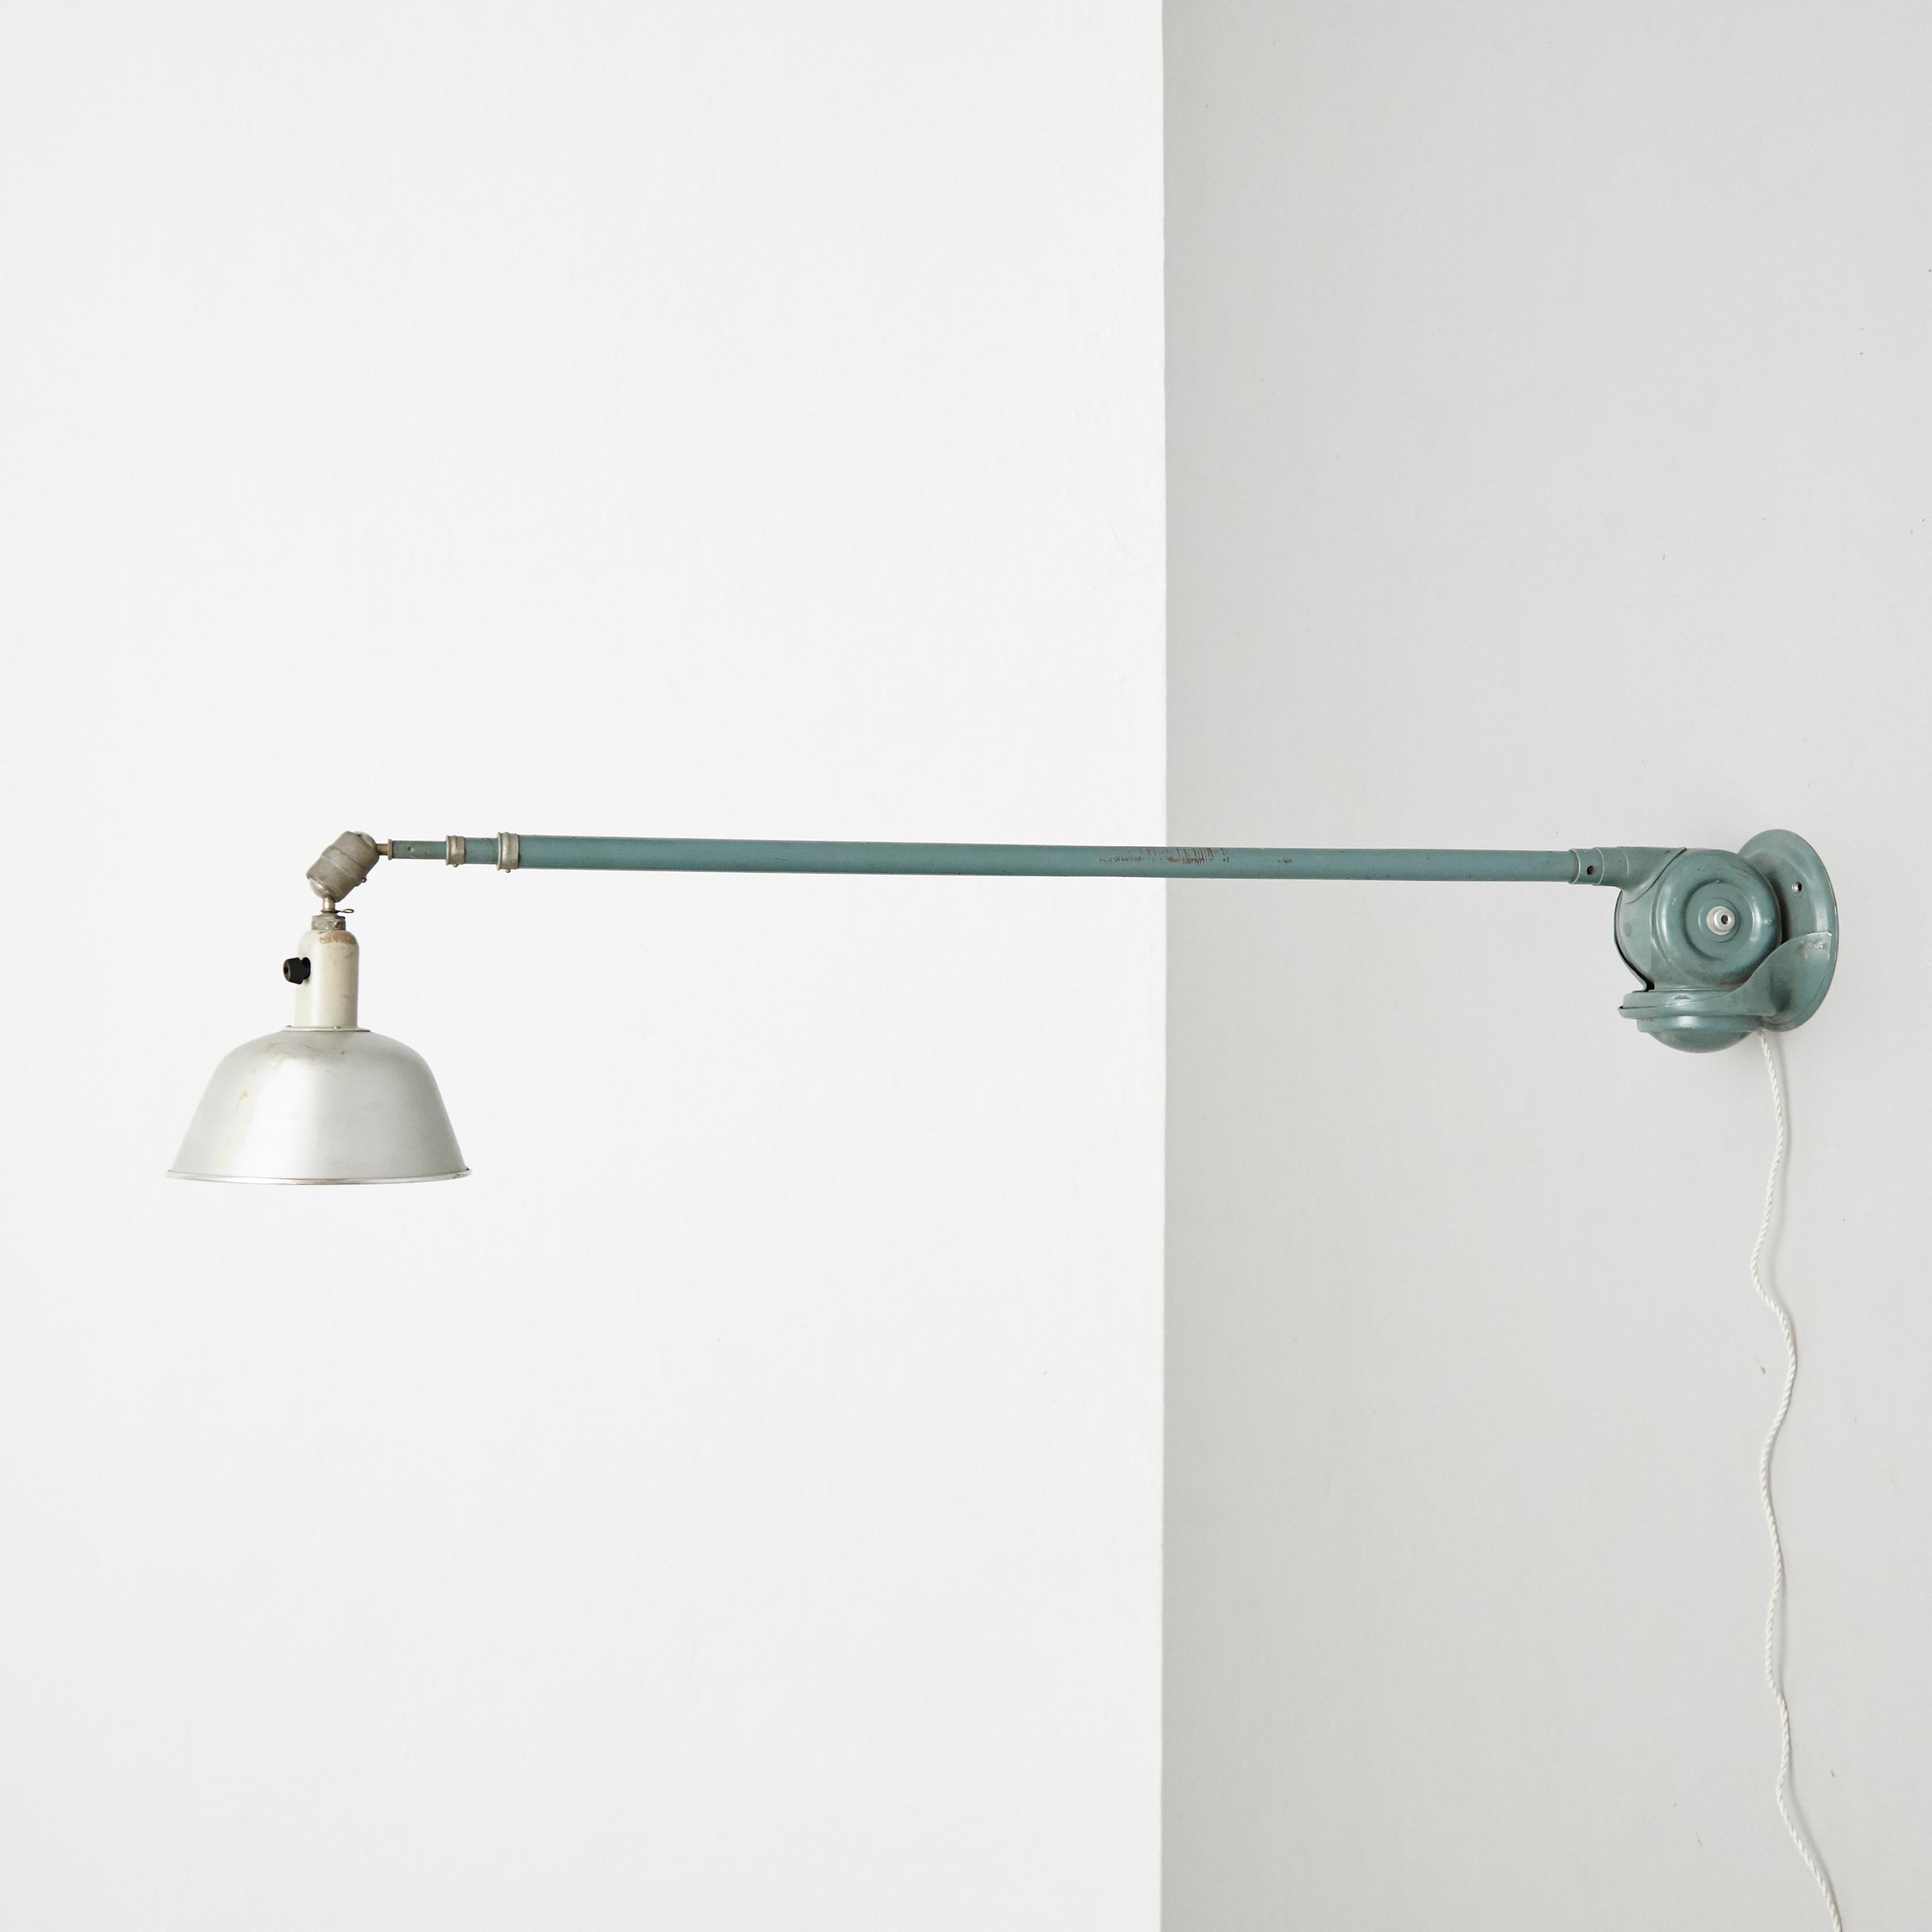 Wall lamp designed by Johan Petter Johansson.
Manufactured by Triplex (Sweden), circa 1930.
In original condition, with minor wear consistent with age and use, preserving a beautiful patina.

Materials:
Aluminium 
Steel

Dimensions:
ø 23 cm